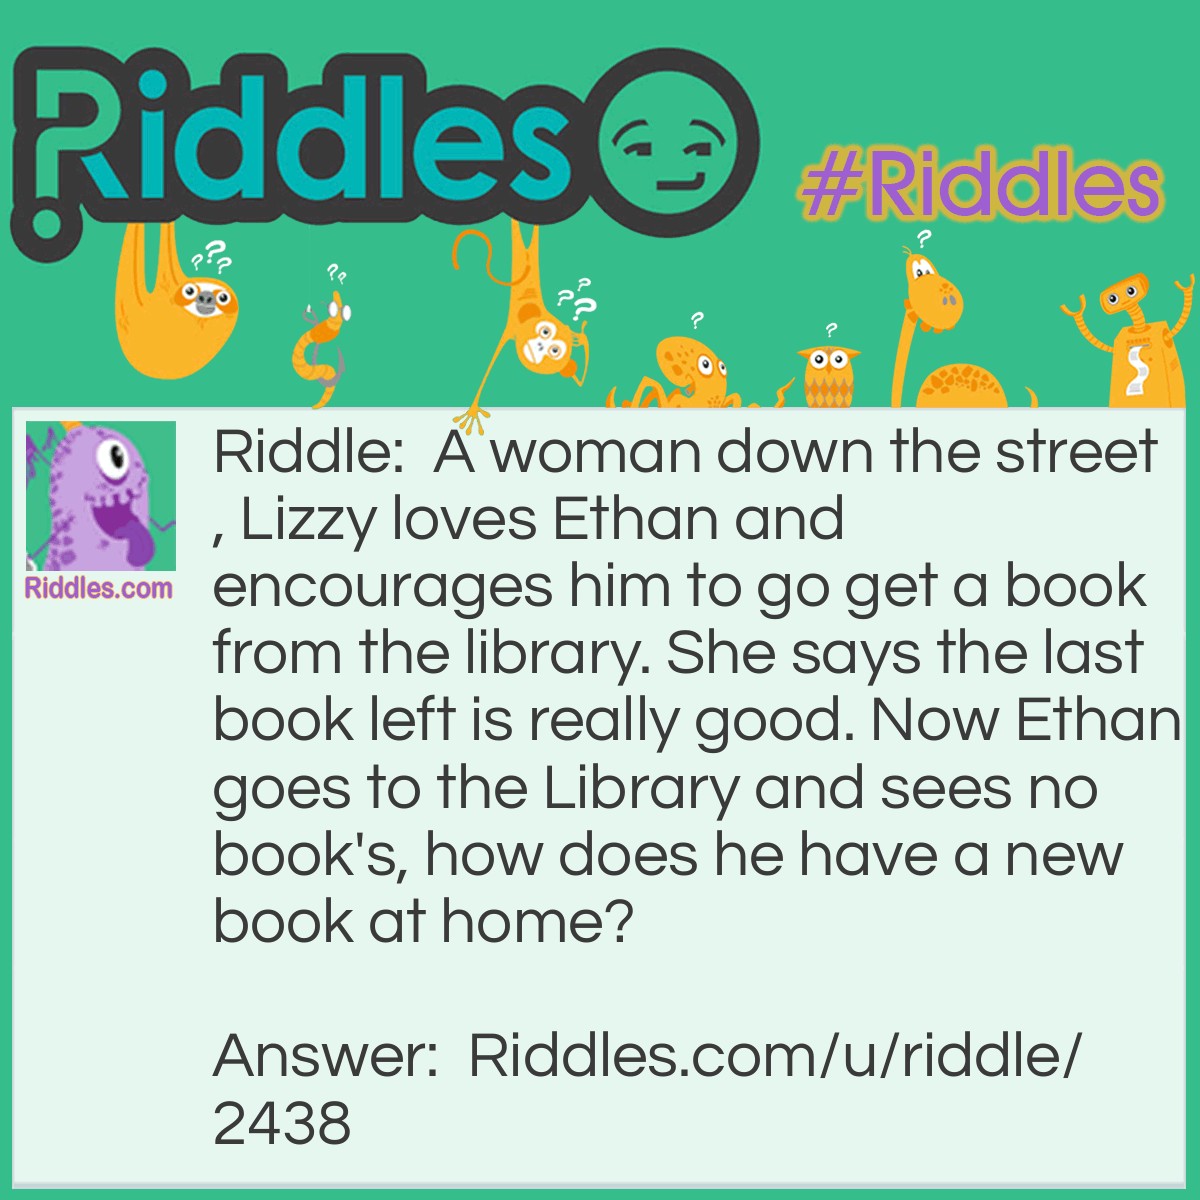 Riddle: A woman down the street, Lizzy loves Ethan and encourages him to go get a book from the library. She says the last book left is really good. Now Ethan goes to the Library and sees no book's, how does he have a new book at home? Answer: Lizzy got the last book and brought it to Ethan.